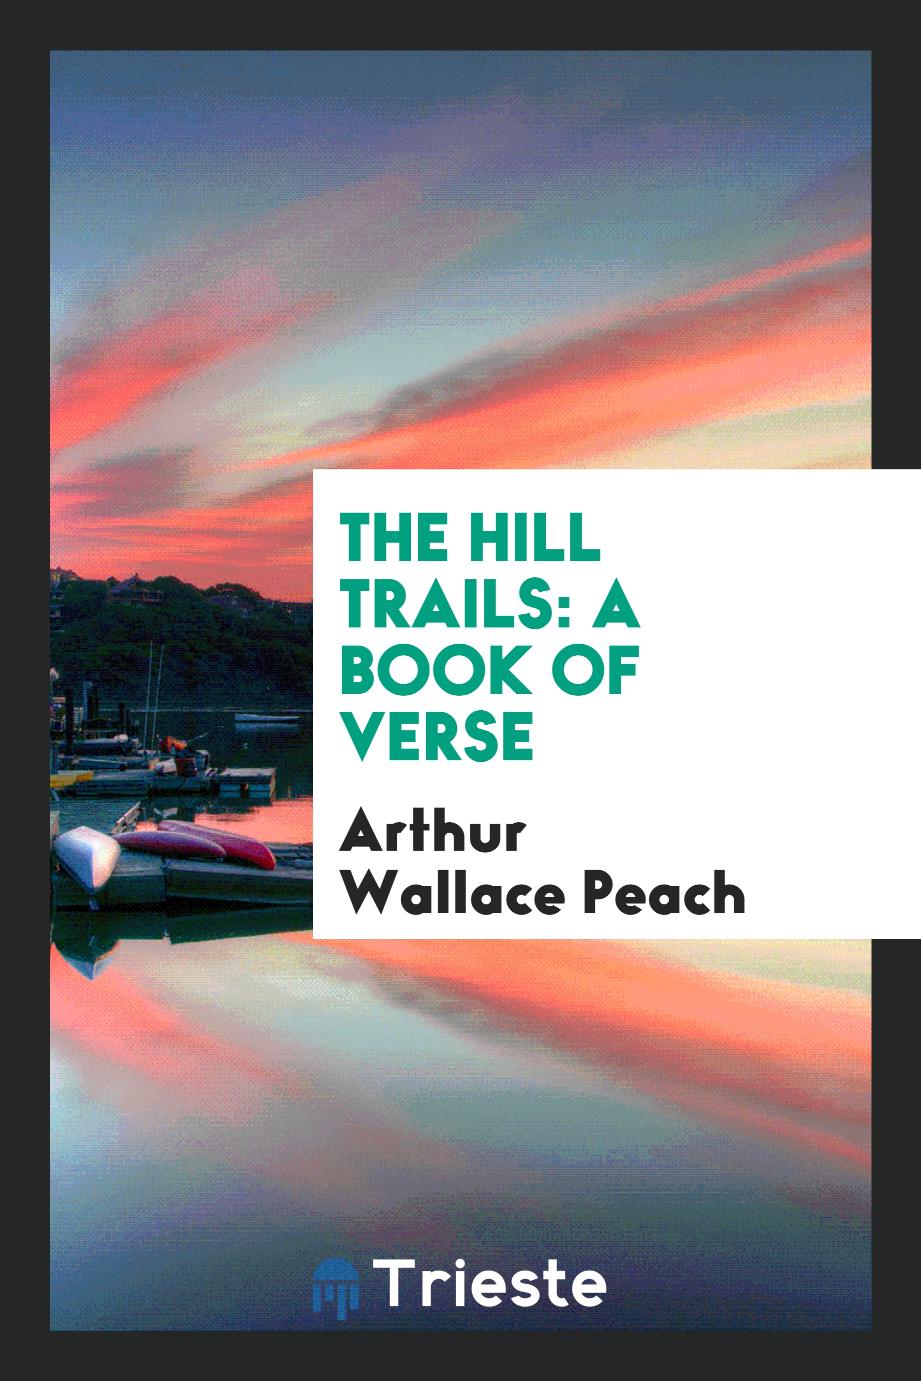 The Hill Trails: A Book of Verse